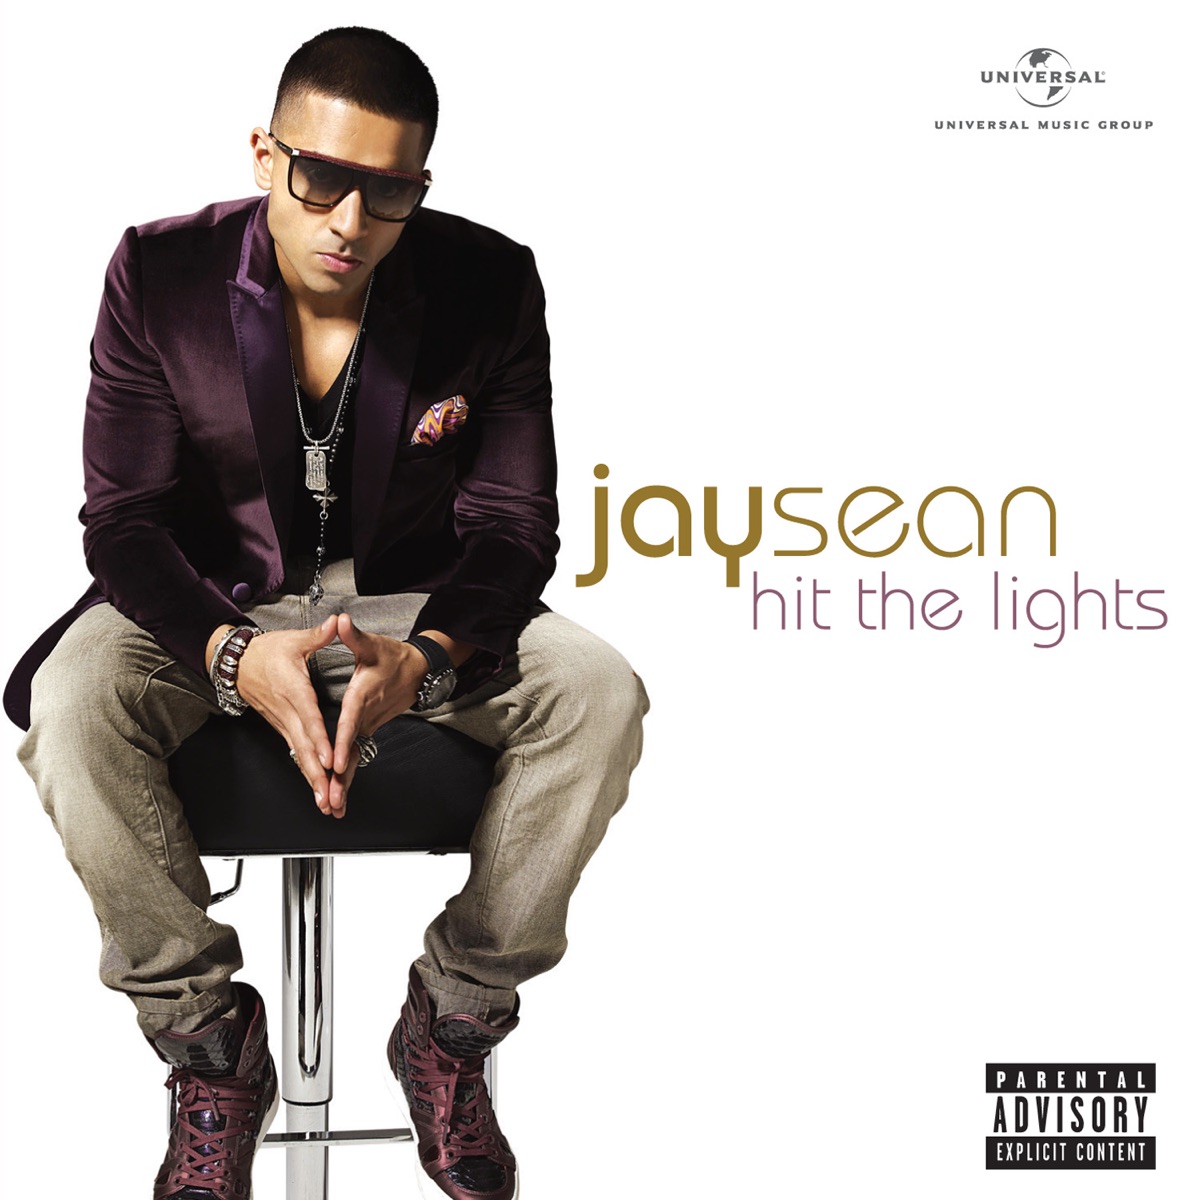 Jay Sean Hit the Lights cover artwork